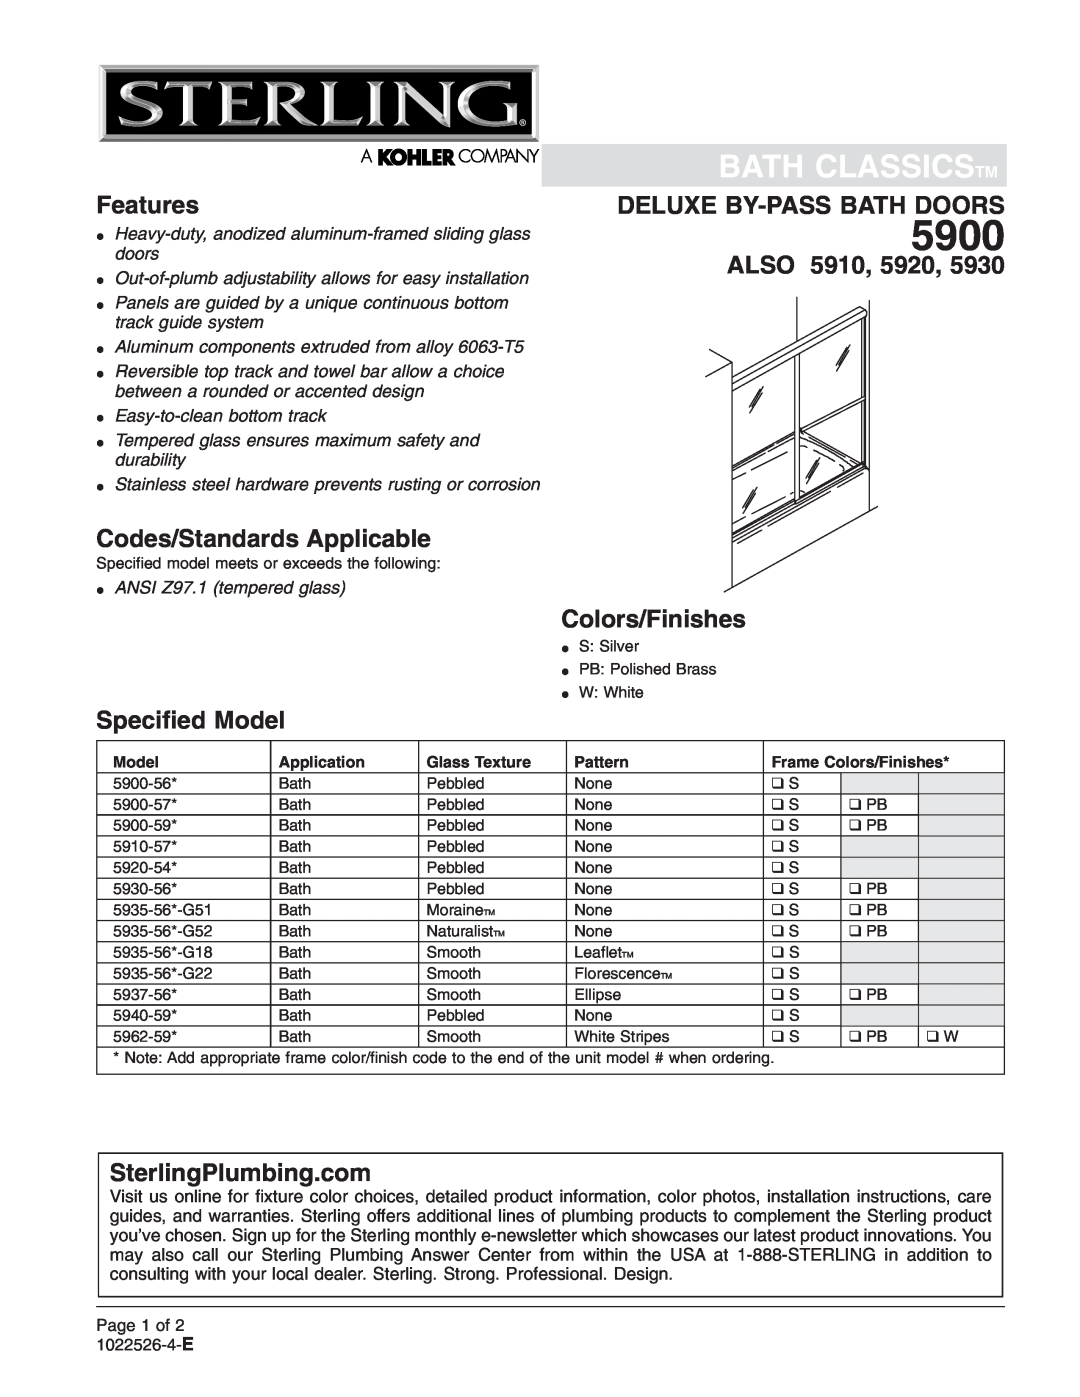 Sterling Plumbing 5935-56*-G52 installation instructions Bath Classicstm, Features, Codes/Standards Applicable, Also, 5900 